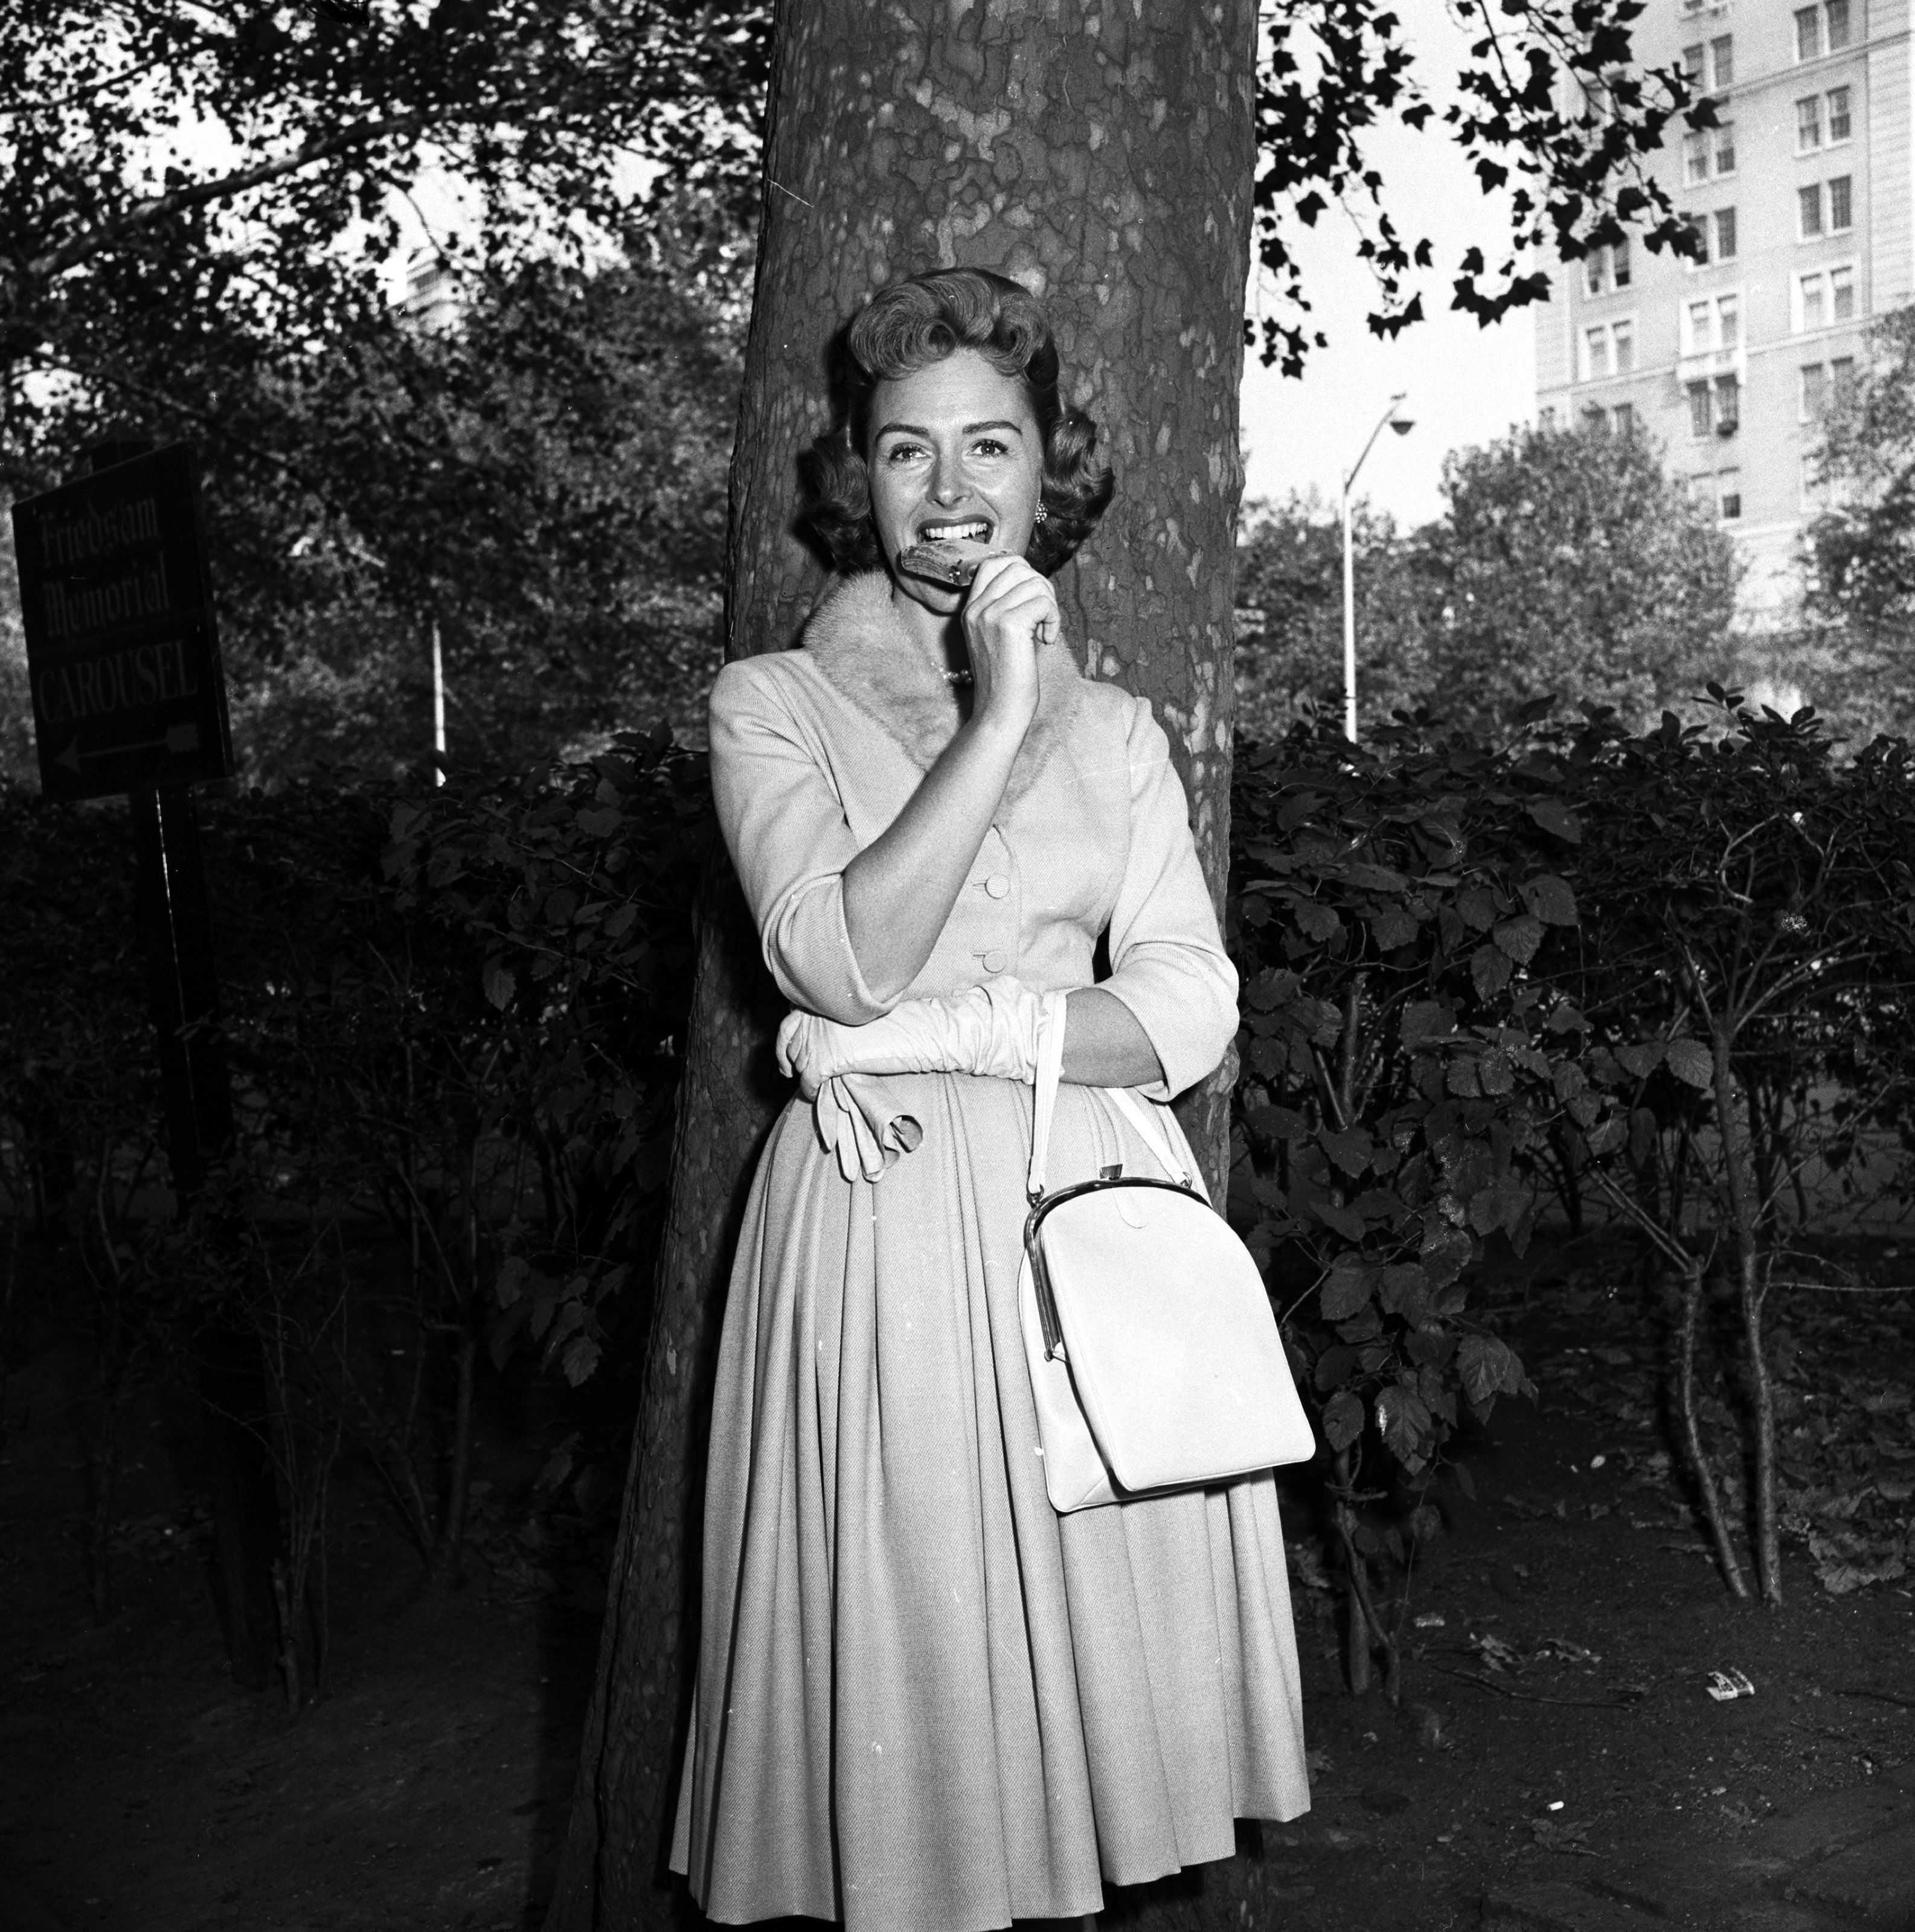 Actress Donna Reed on the set of "The Donna Reed Show" on September 21, 1959. | Source: Getty Images